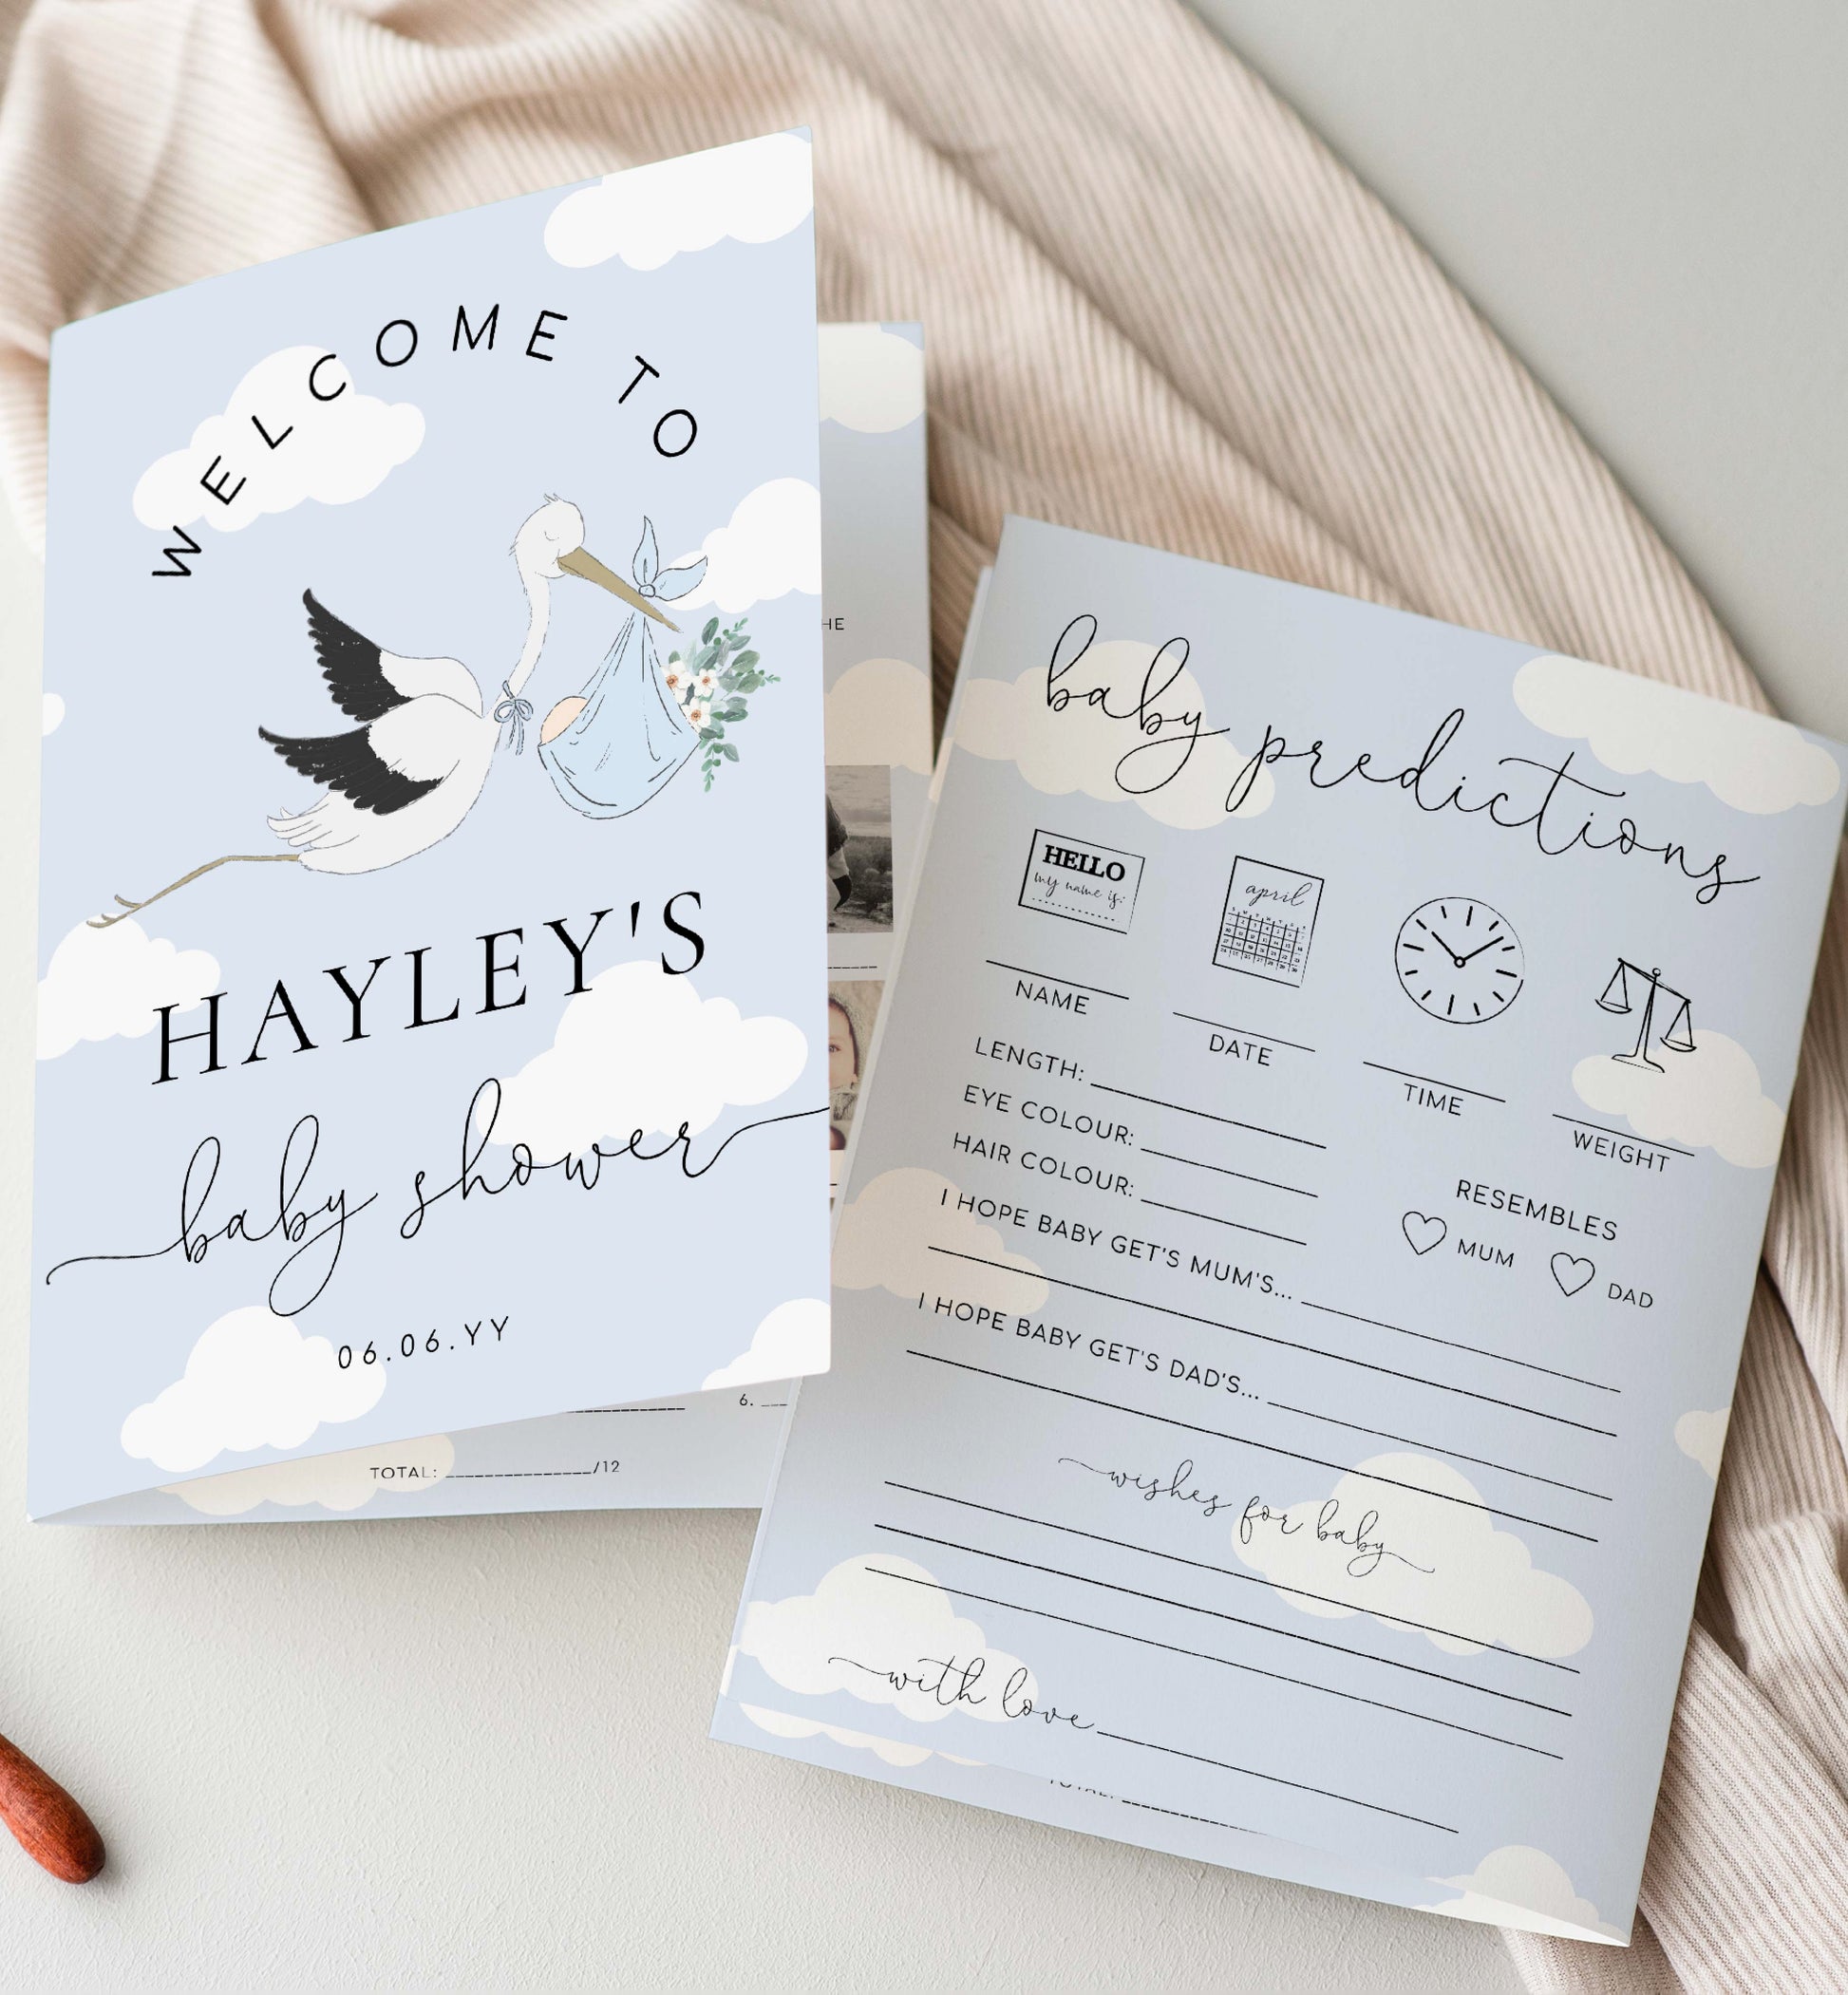 Printable Baby Shower Games Booklet, Baby Photo Game, Baby Predications Game, Couples Trivia, Boy Baby Shower Games, Blue Stork Baby Shower